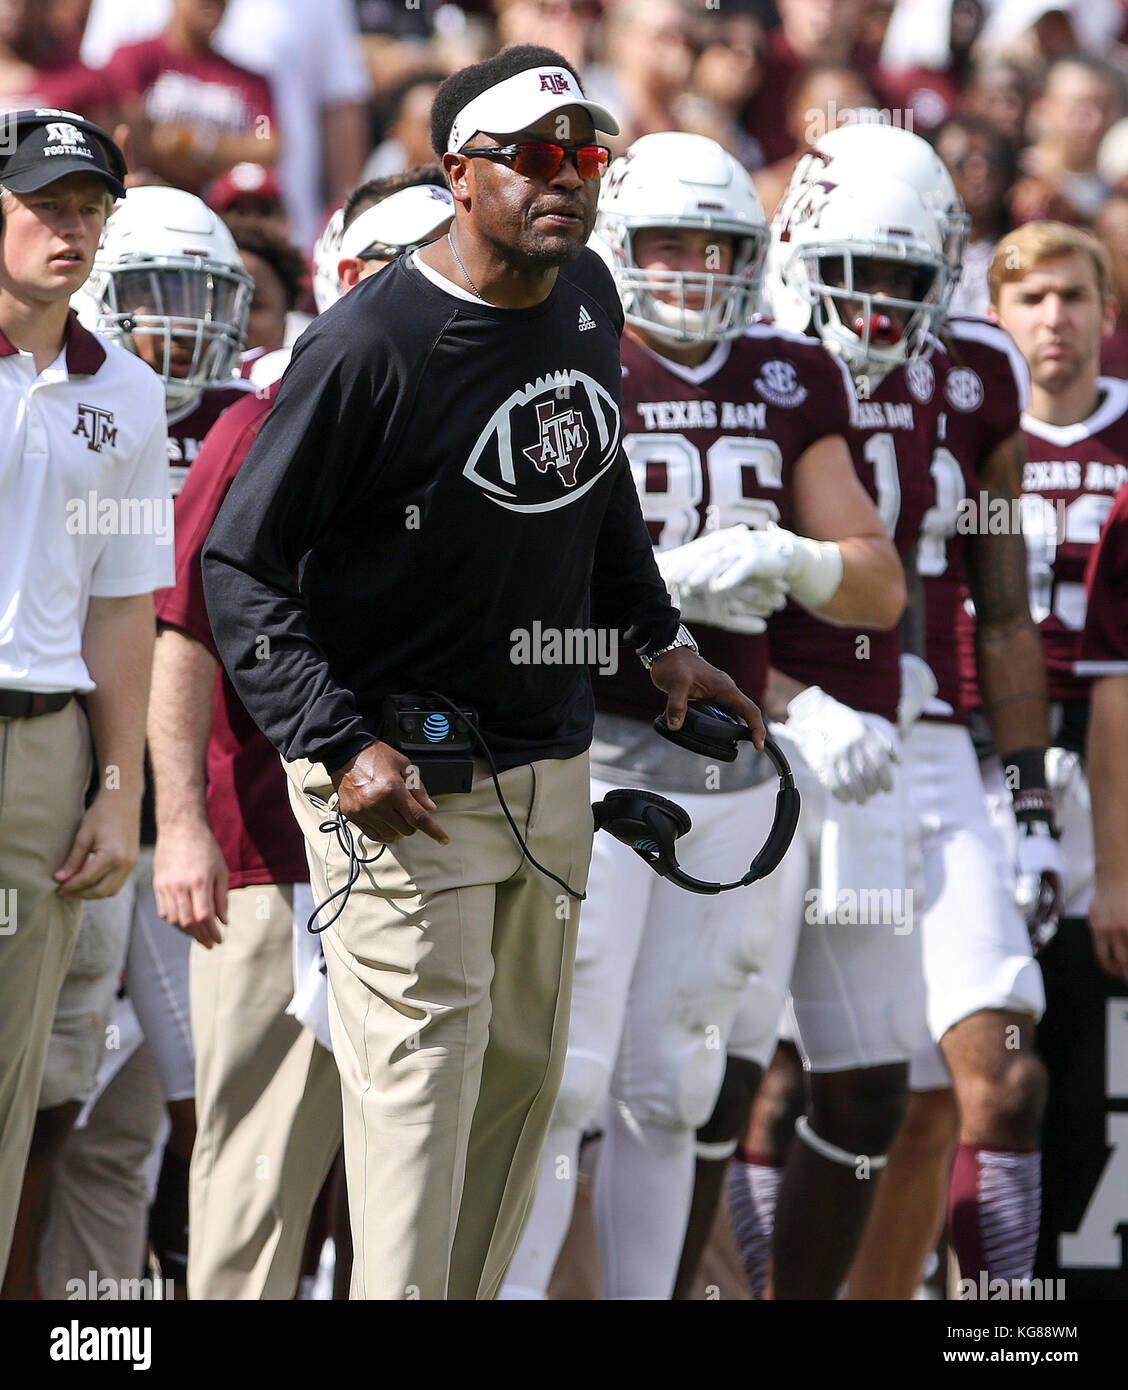 November 4, 2017: Texas A&M Aggies head coach Kevin Sumlin during the NCAA football game between the Auburn Tigers and the Texas A&M Aggies at Kyle Field in College Station, TX; John Glaser/CSM. Stock Photo